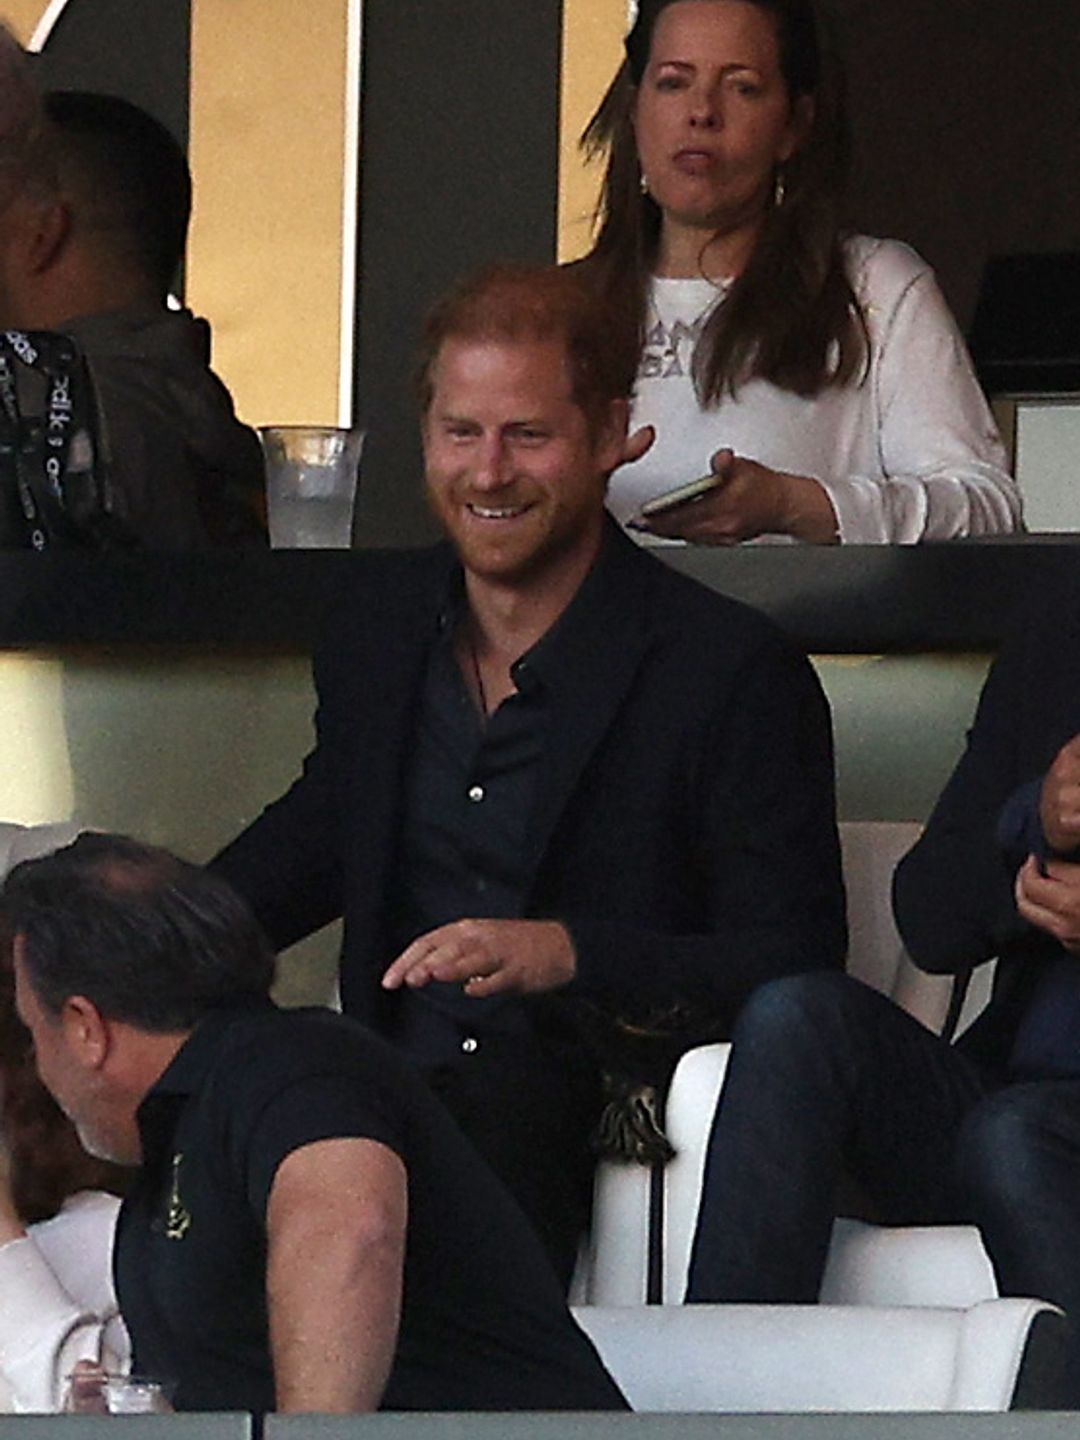 Prince Harry laughs while watching a football match